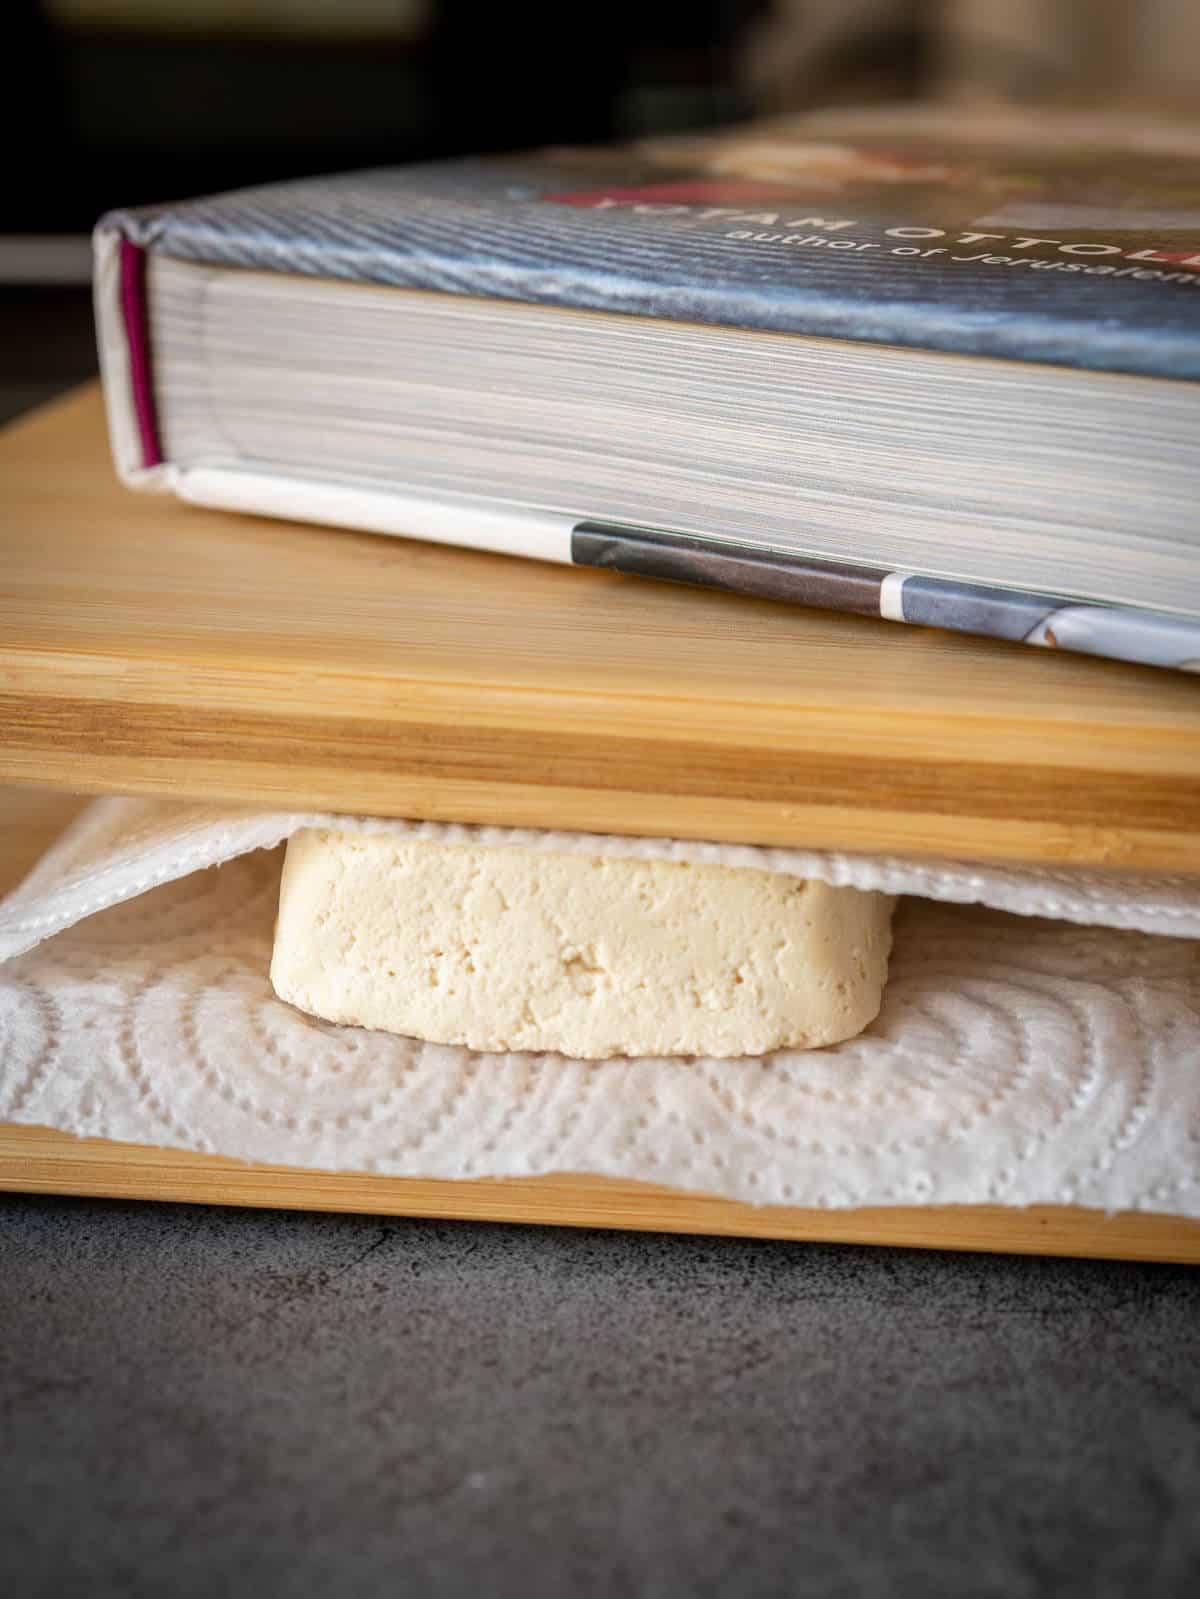 press tofu slices between paper towels and place heavy objects like books on tops.